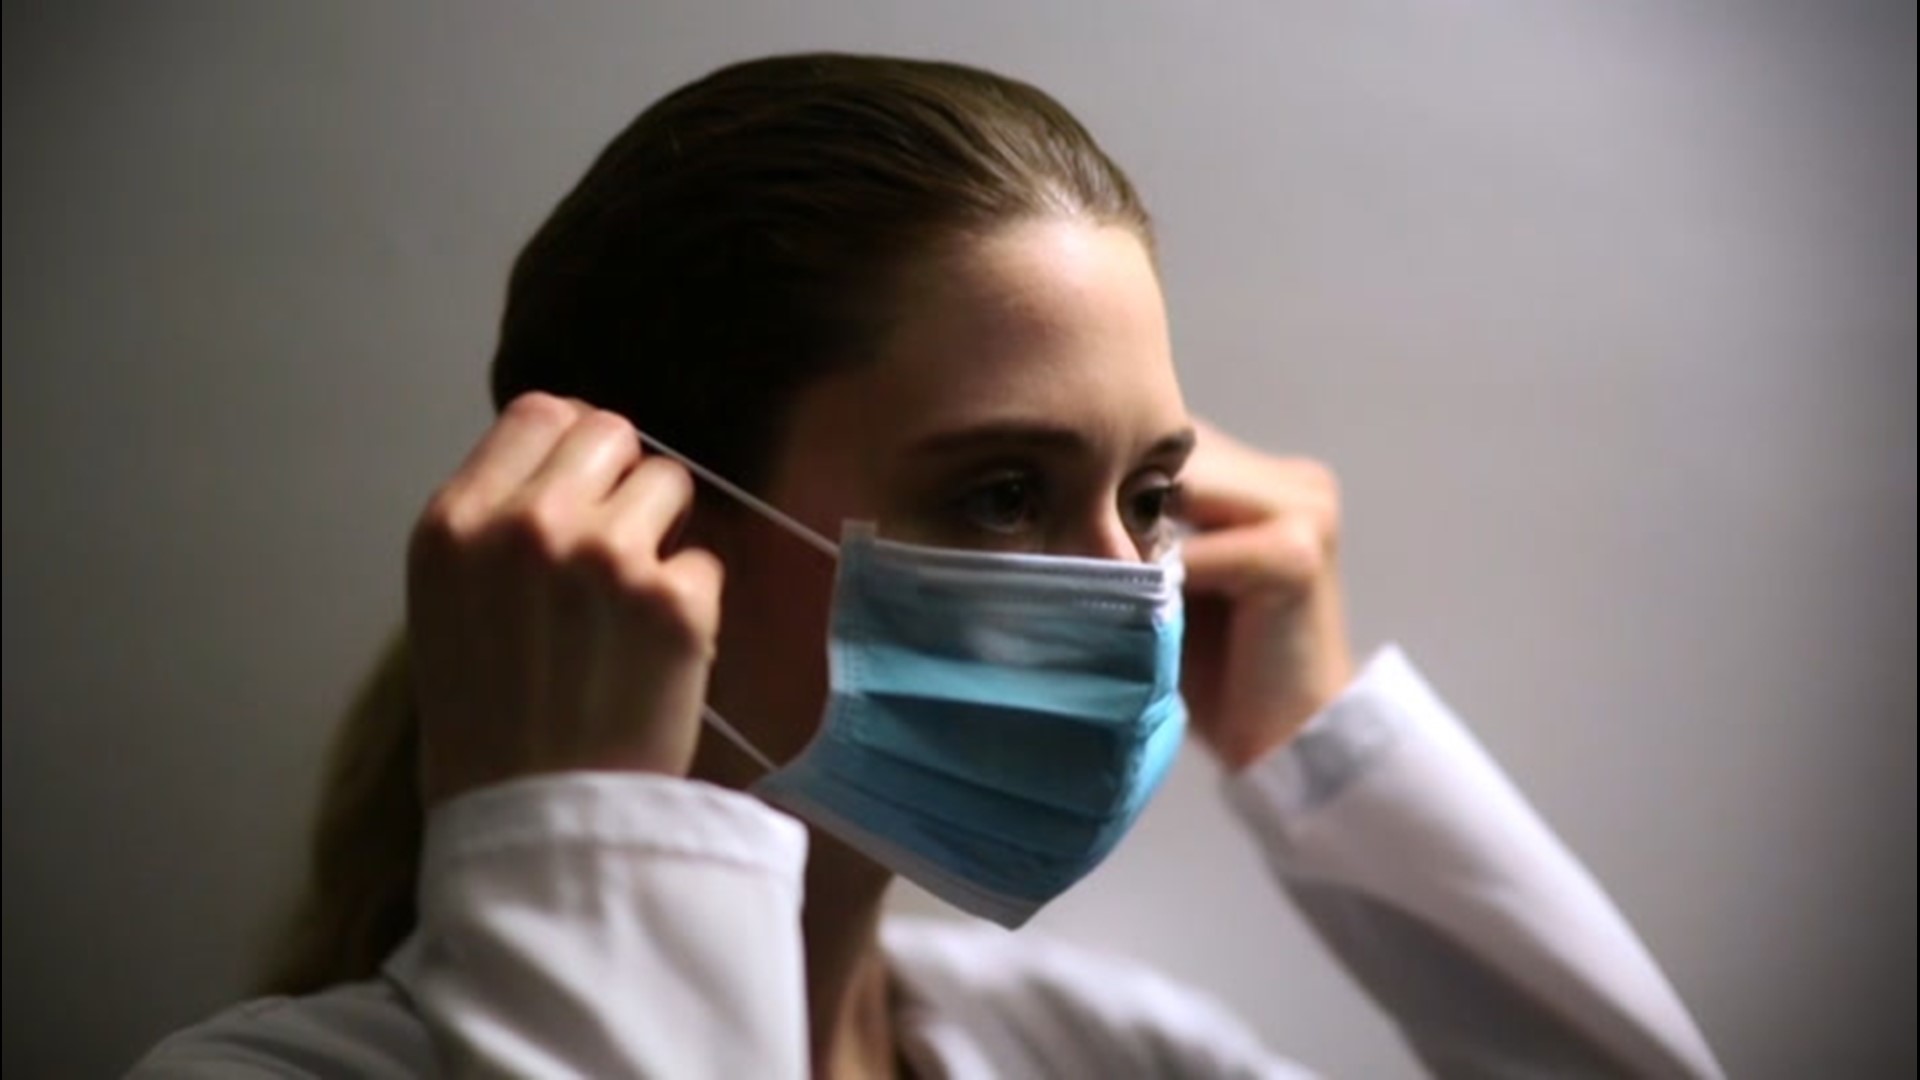 As the coronavirus pandemic continues, AccuWeather spoke with health expert Dr. Shan Soe-Lin who says Americans may need to continue wearing the mask.